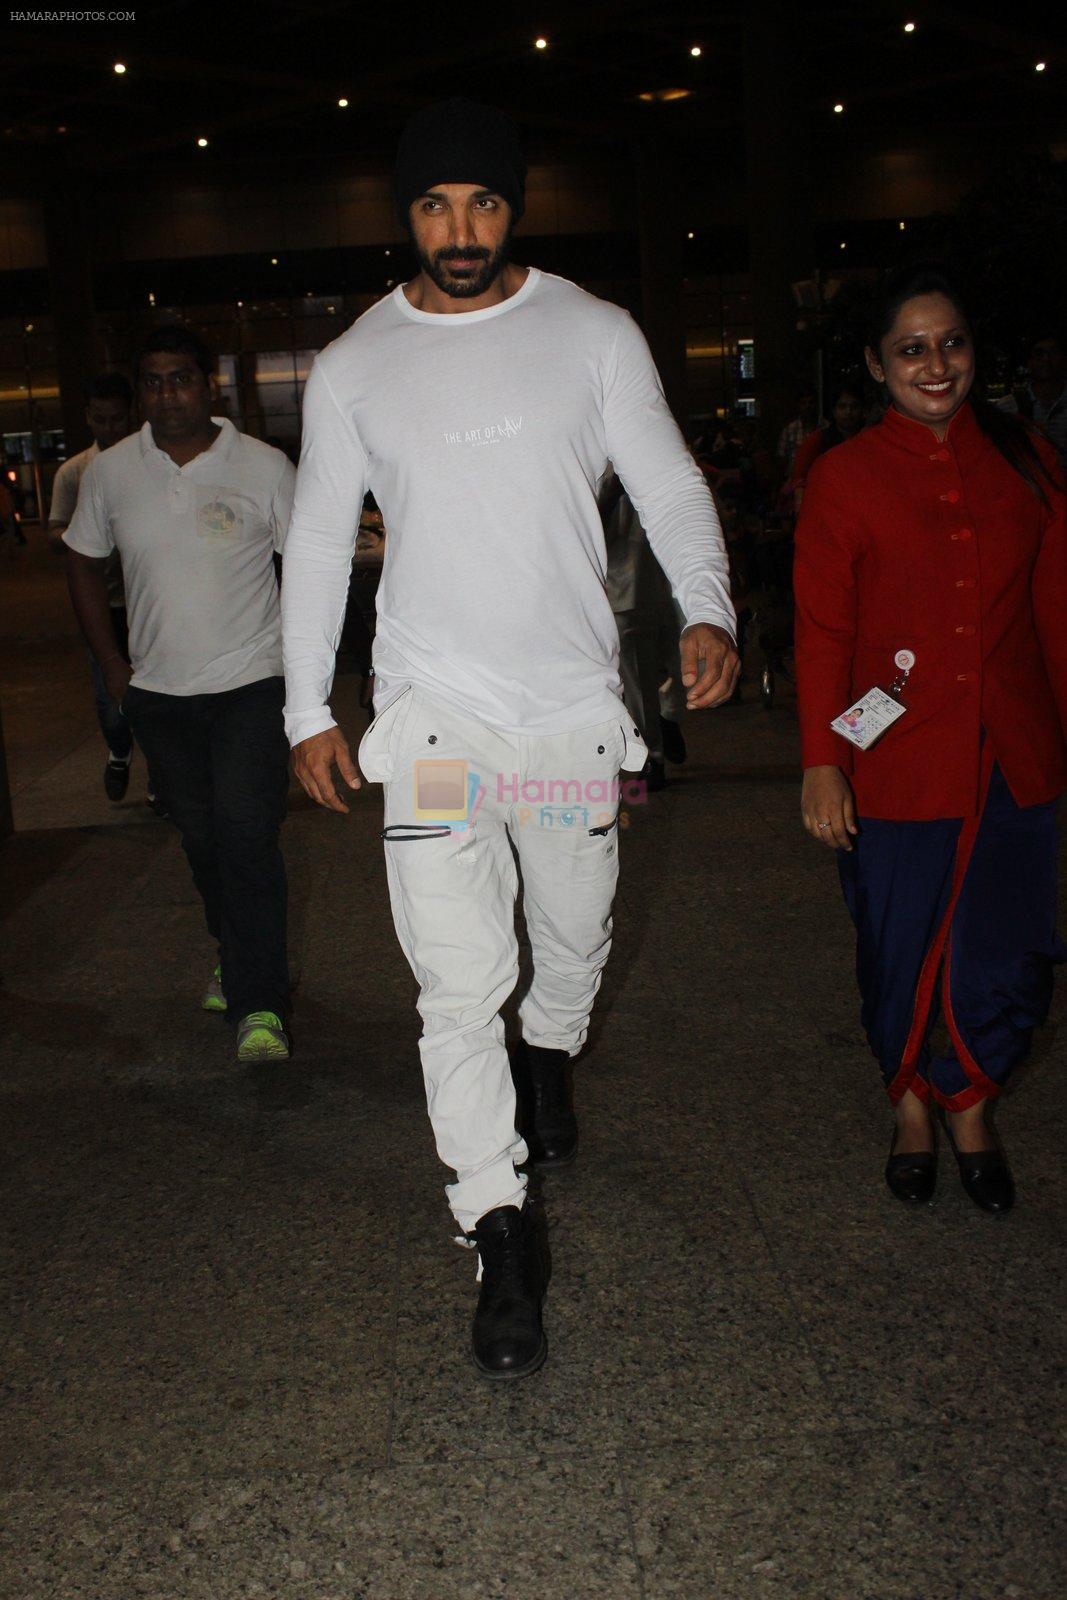 John Abraham snapped at airport on 13th June 2016